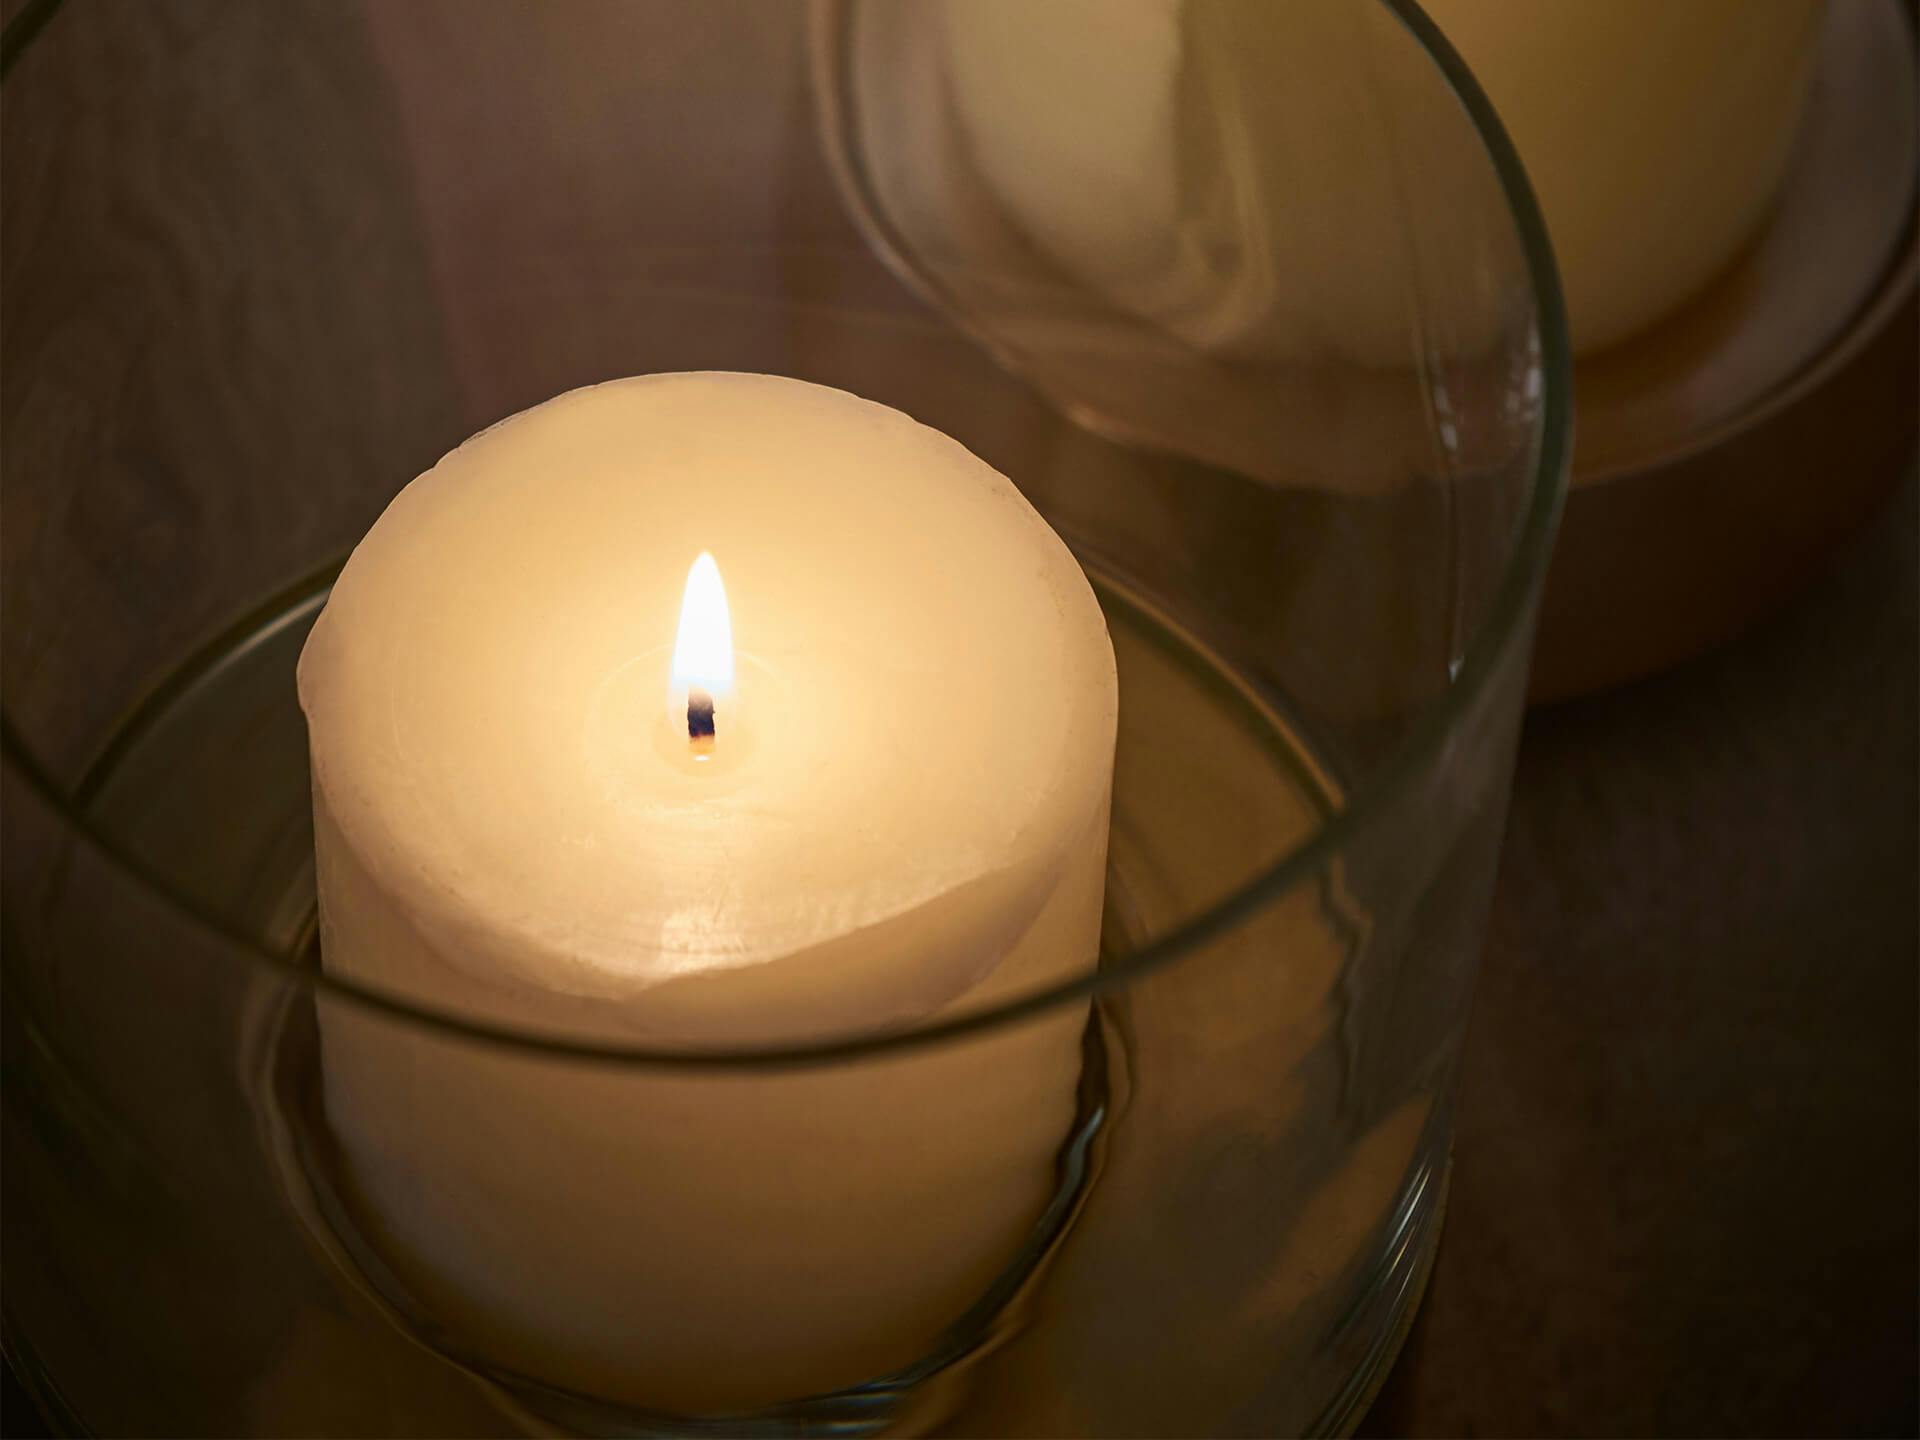 Overhead view of a burning candle in a glass holder